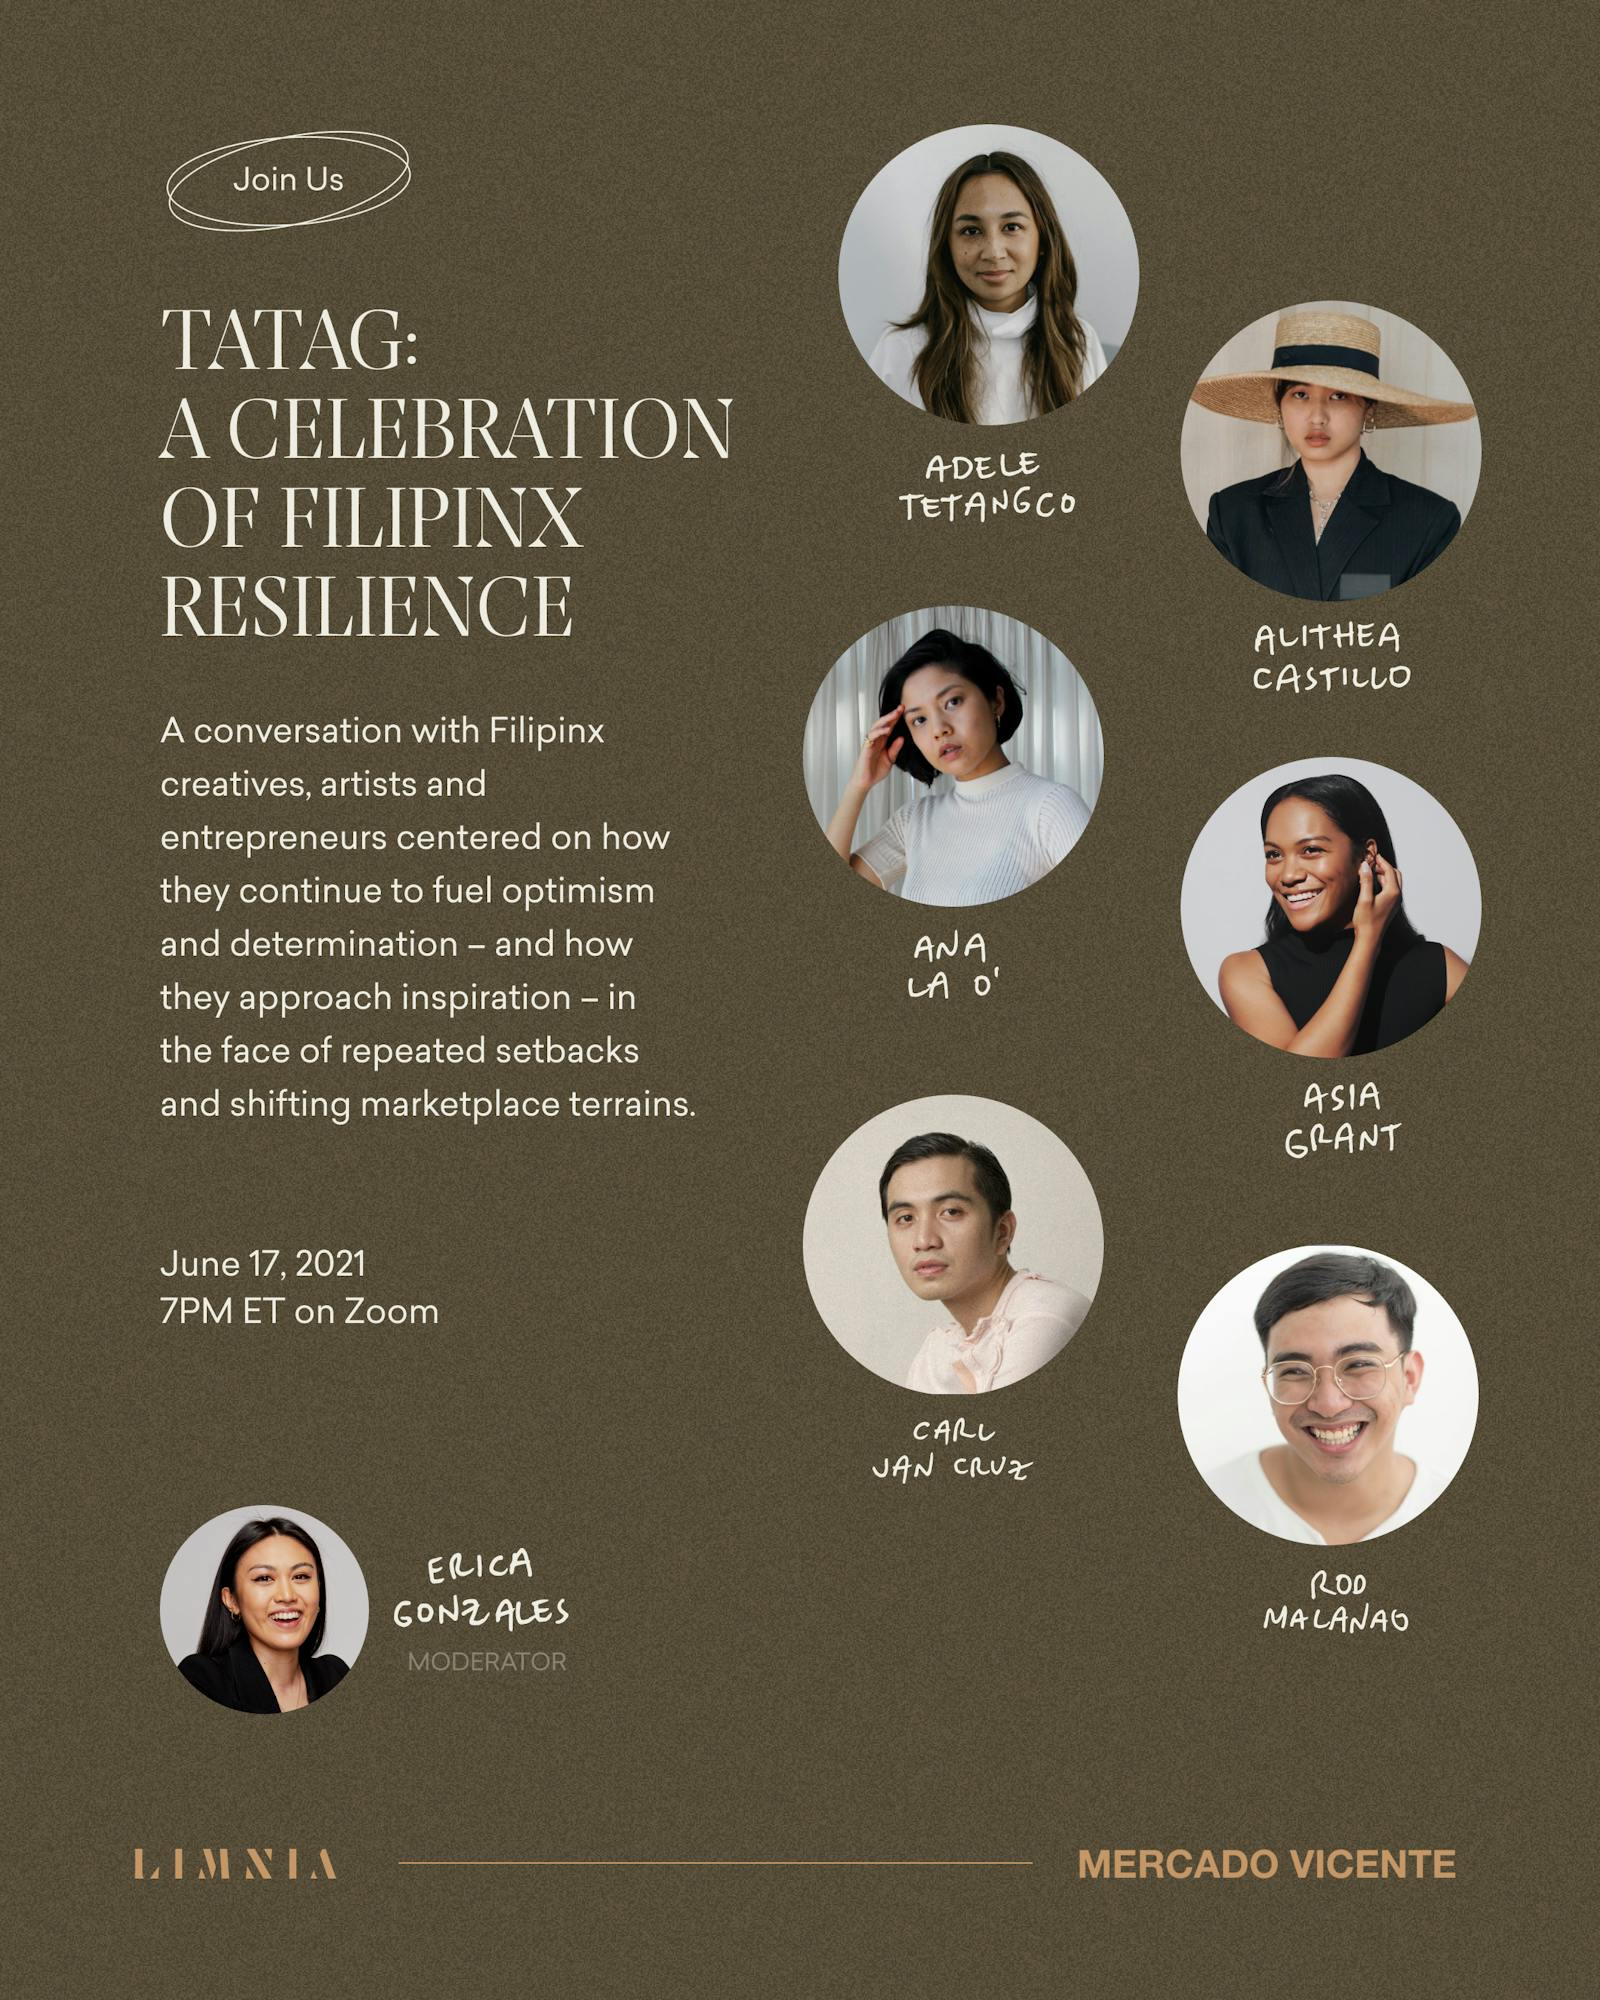 Tatag: A Celebration of Filipinx Resilience